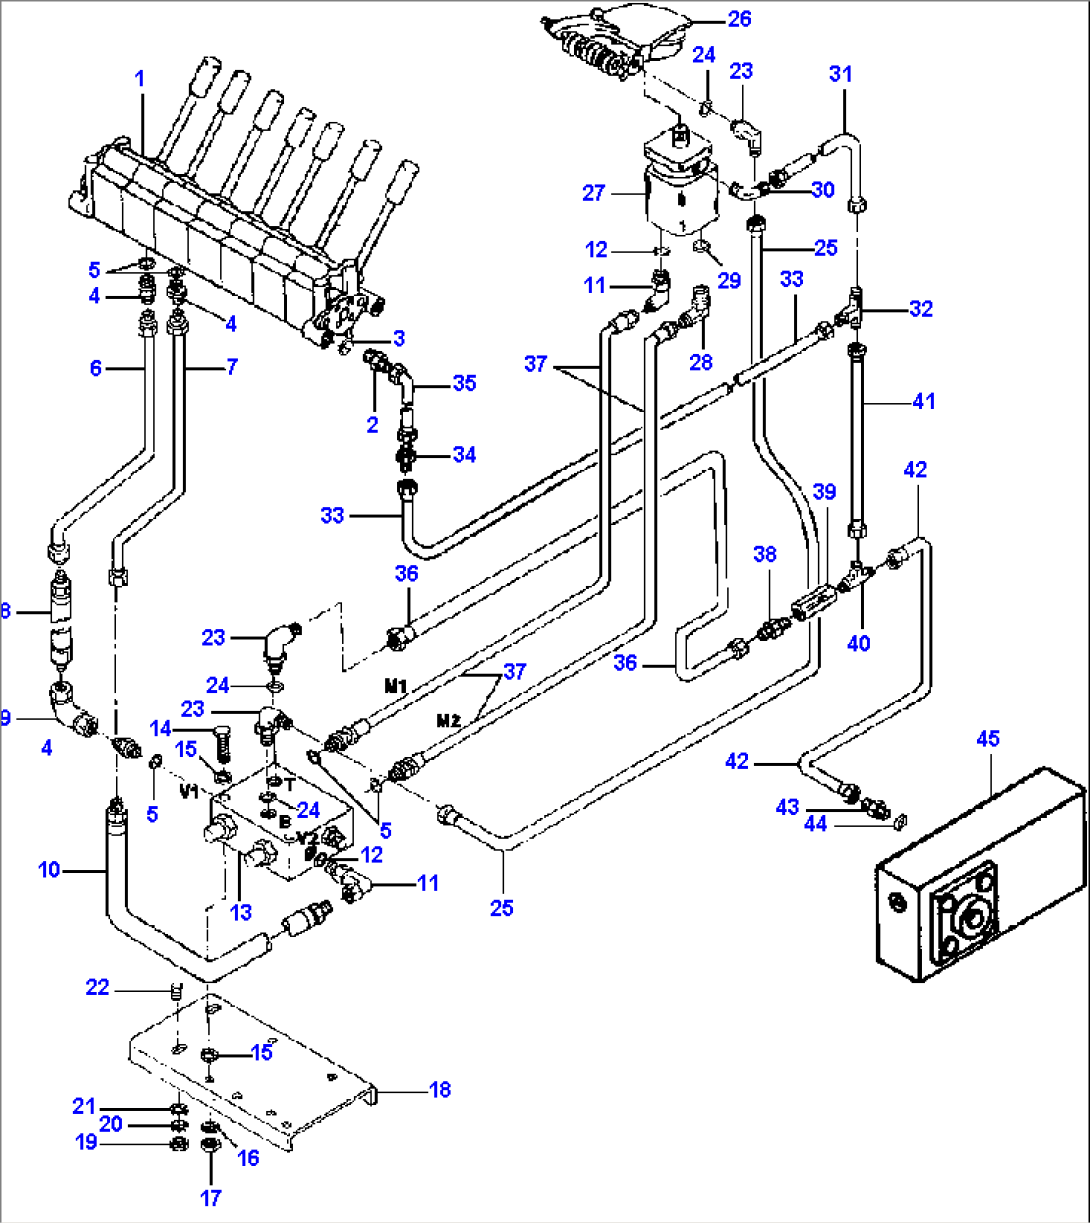 SWING DRIVE ACTUATOR LINES